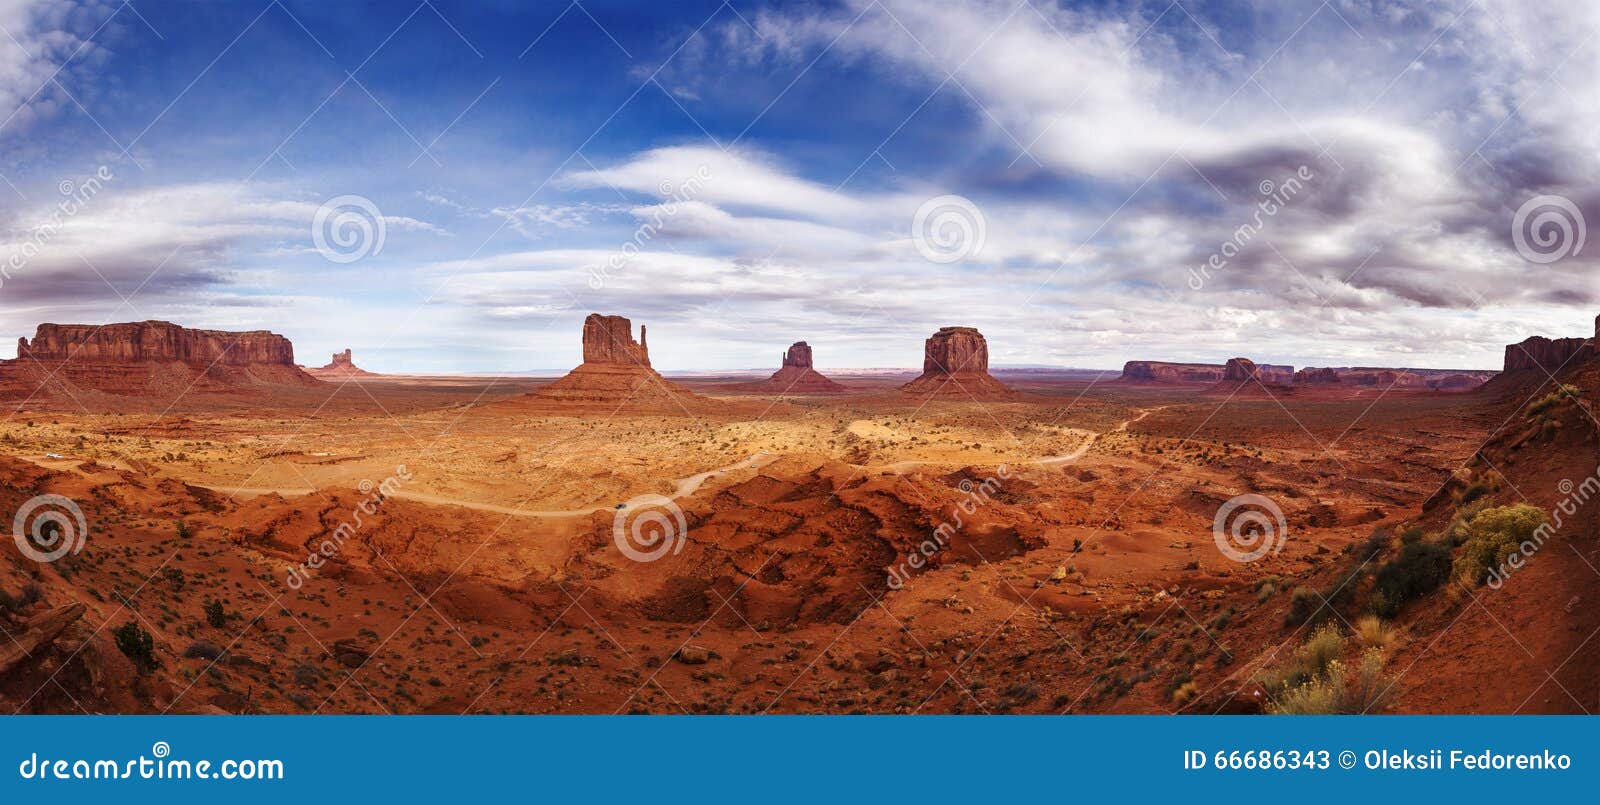 sunset in monument valley navajo reservation